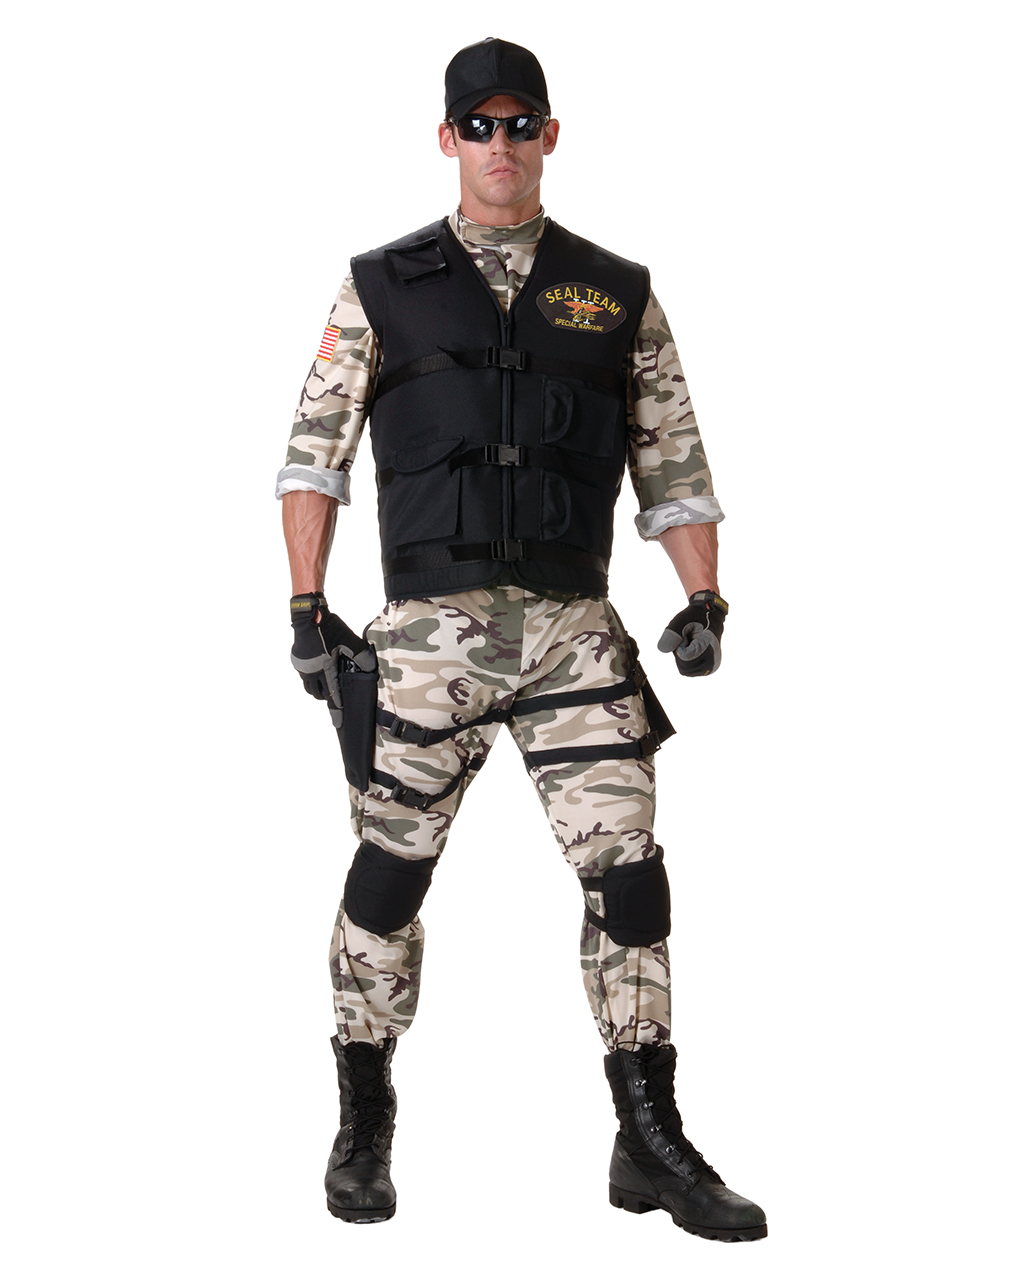 Navy Seal Uniform Costume Us Army Disguise Horror Shop Com